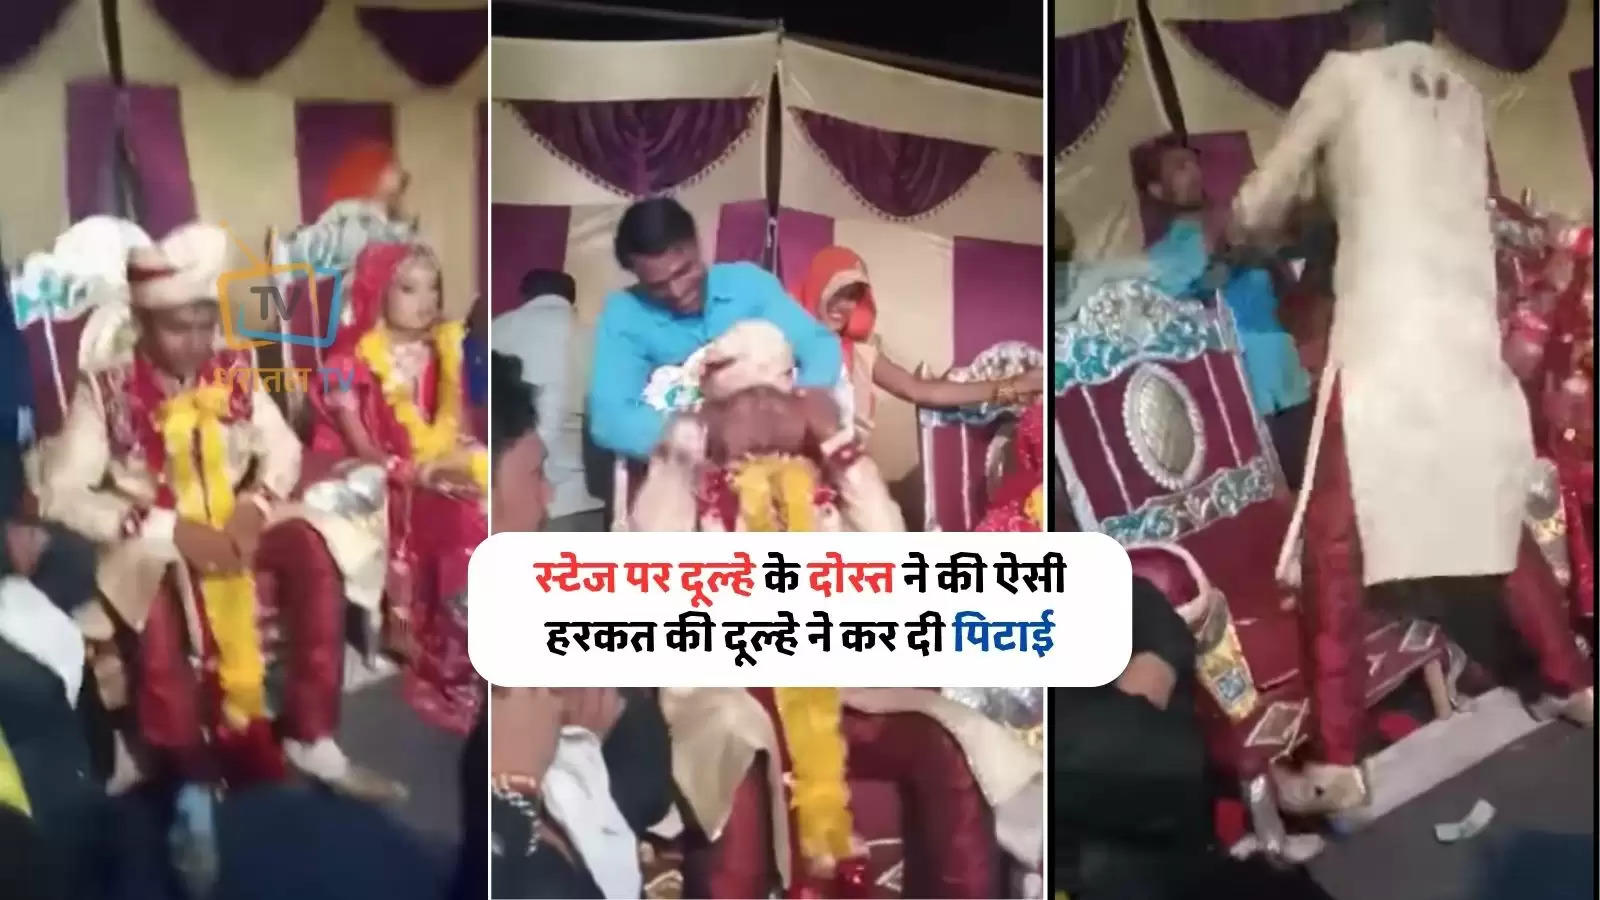 The groom's friend did such an act on the stage, the groom beat him